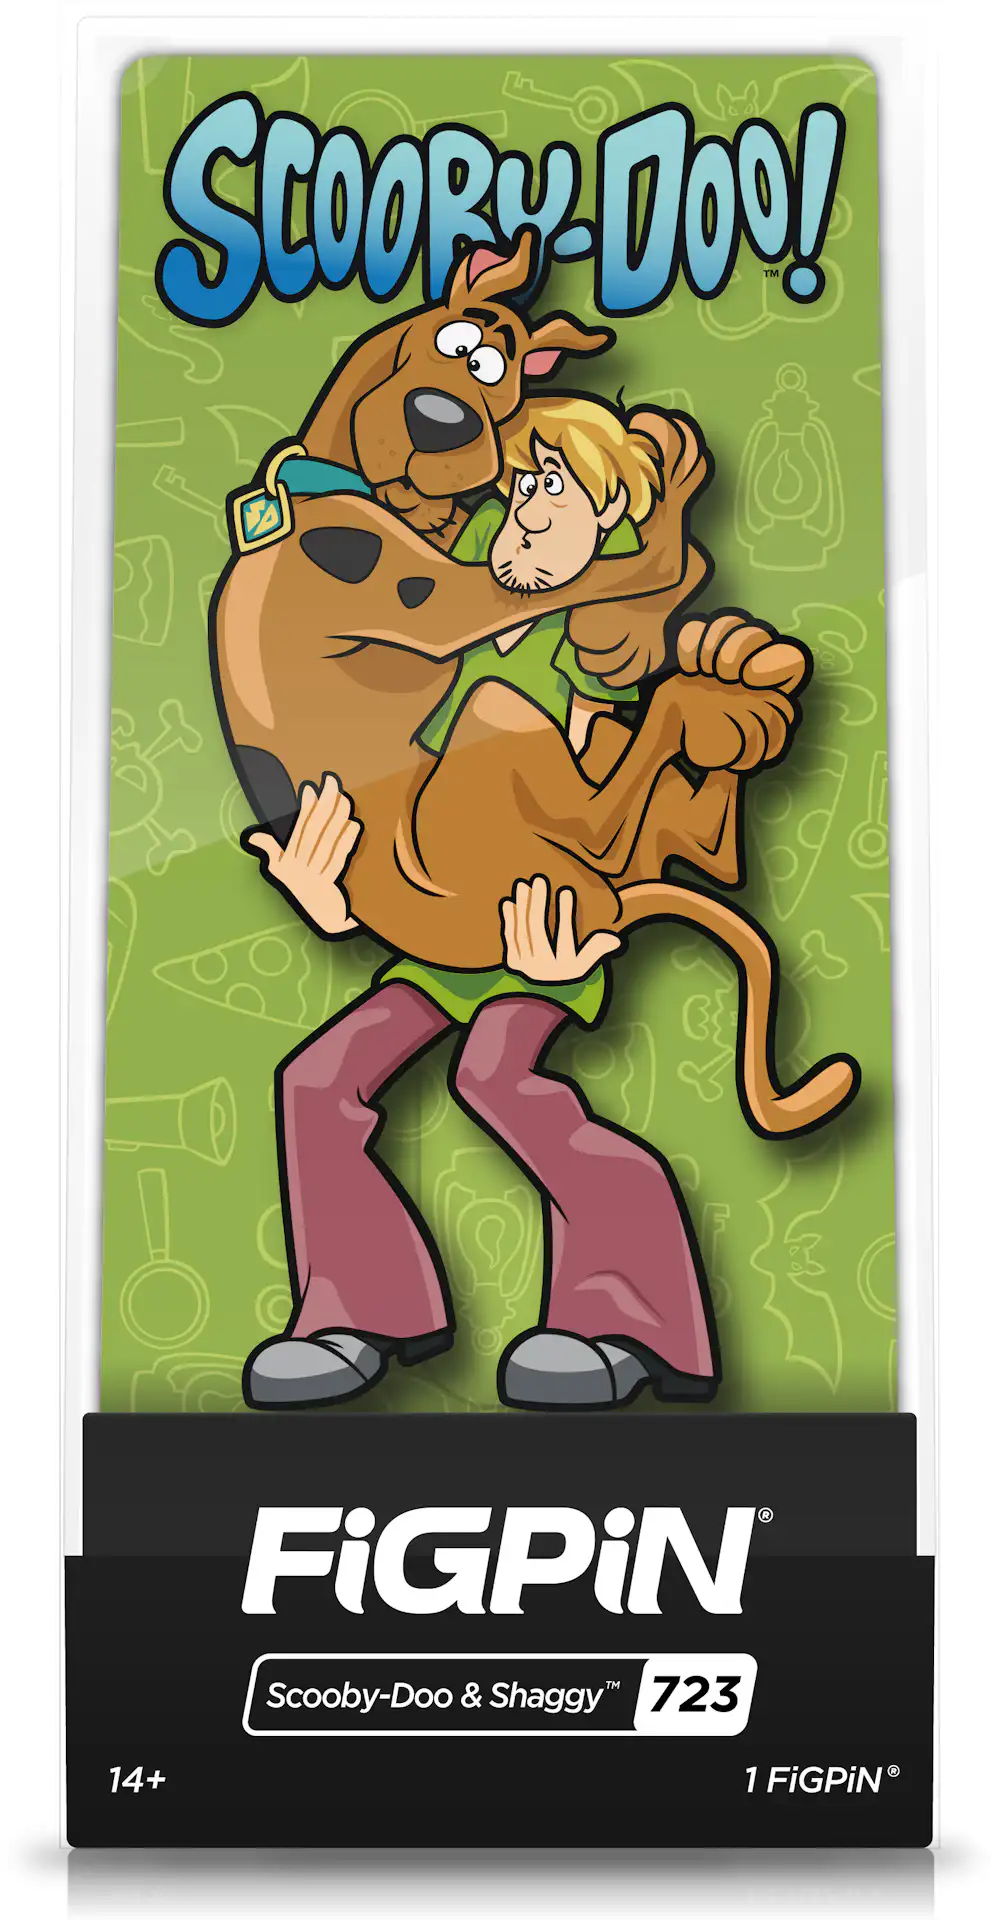 FiGPiN Scooby-Doo! Scooby-Doo & Shaggy Exclusive Pin #723 - IT